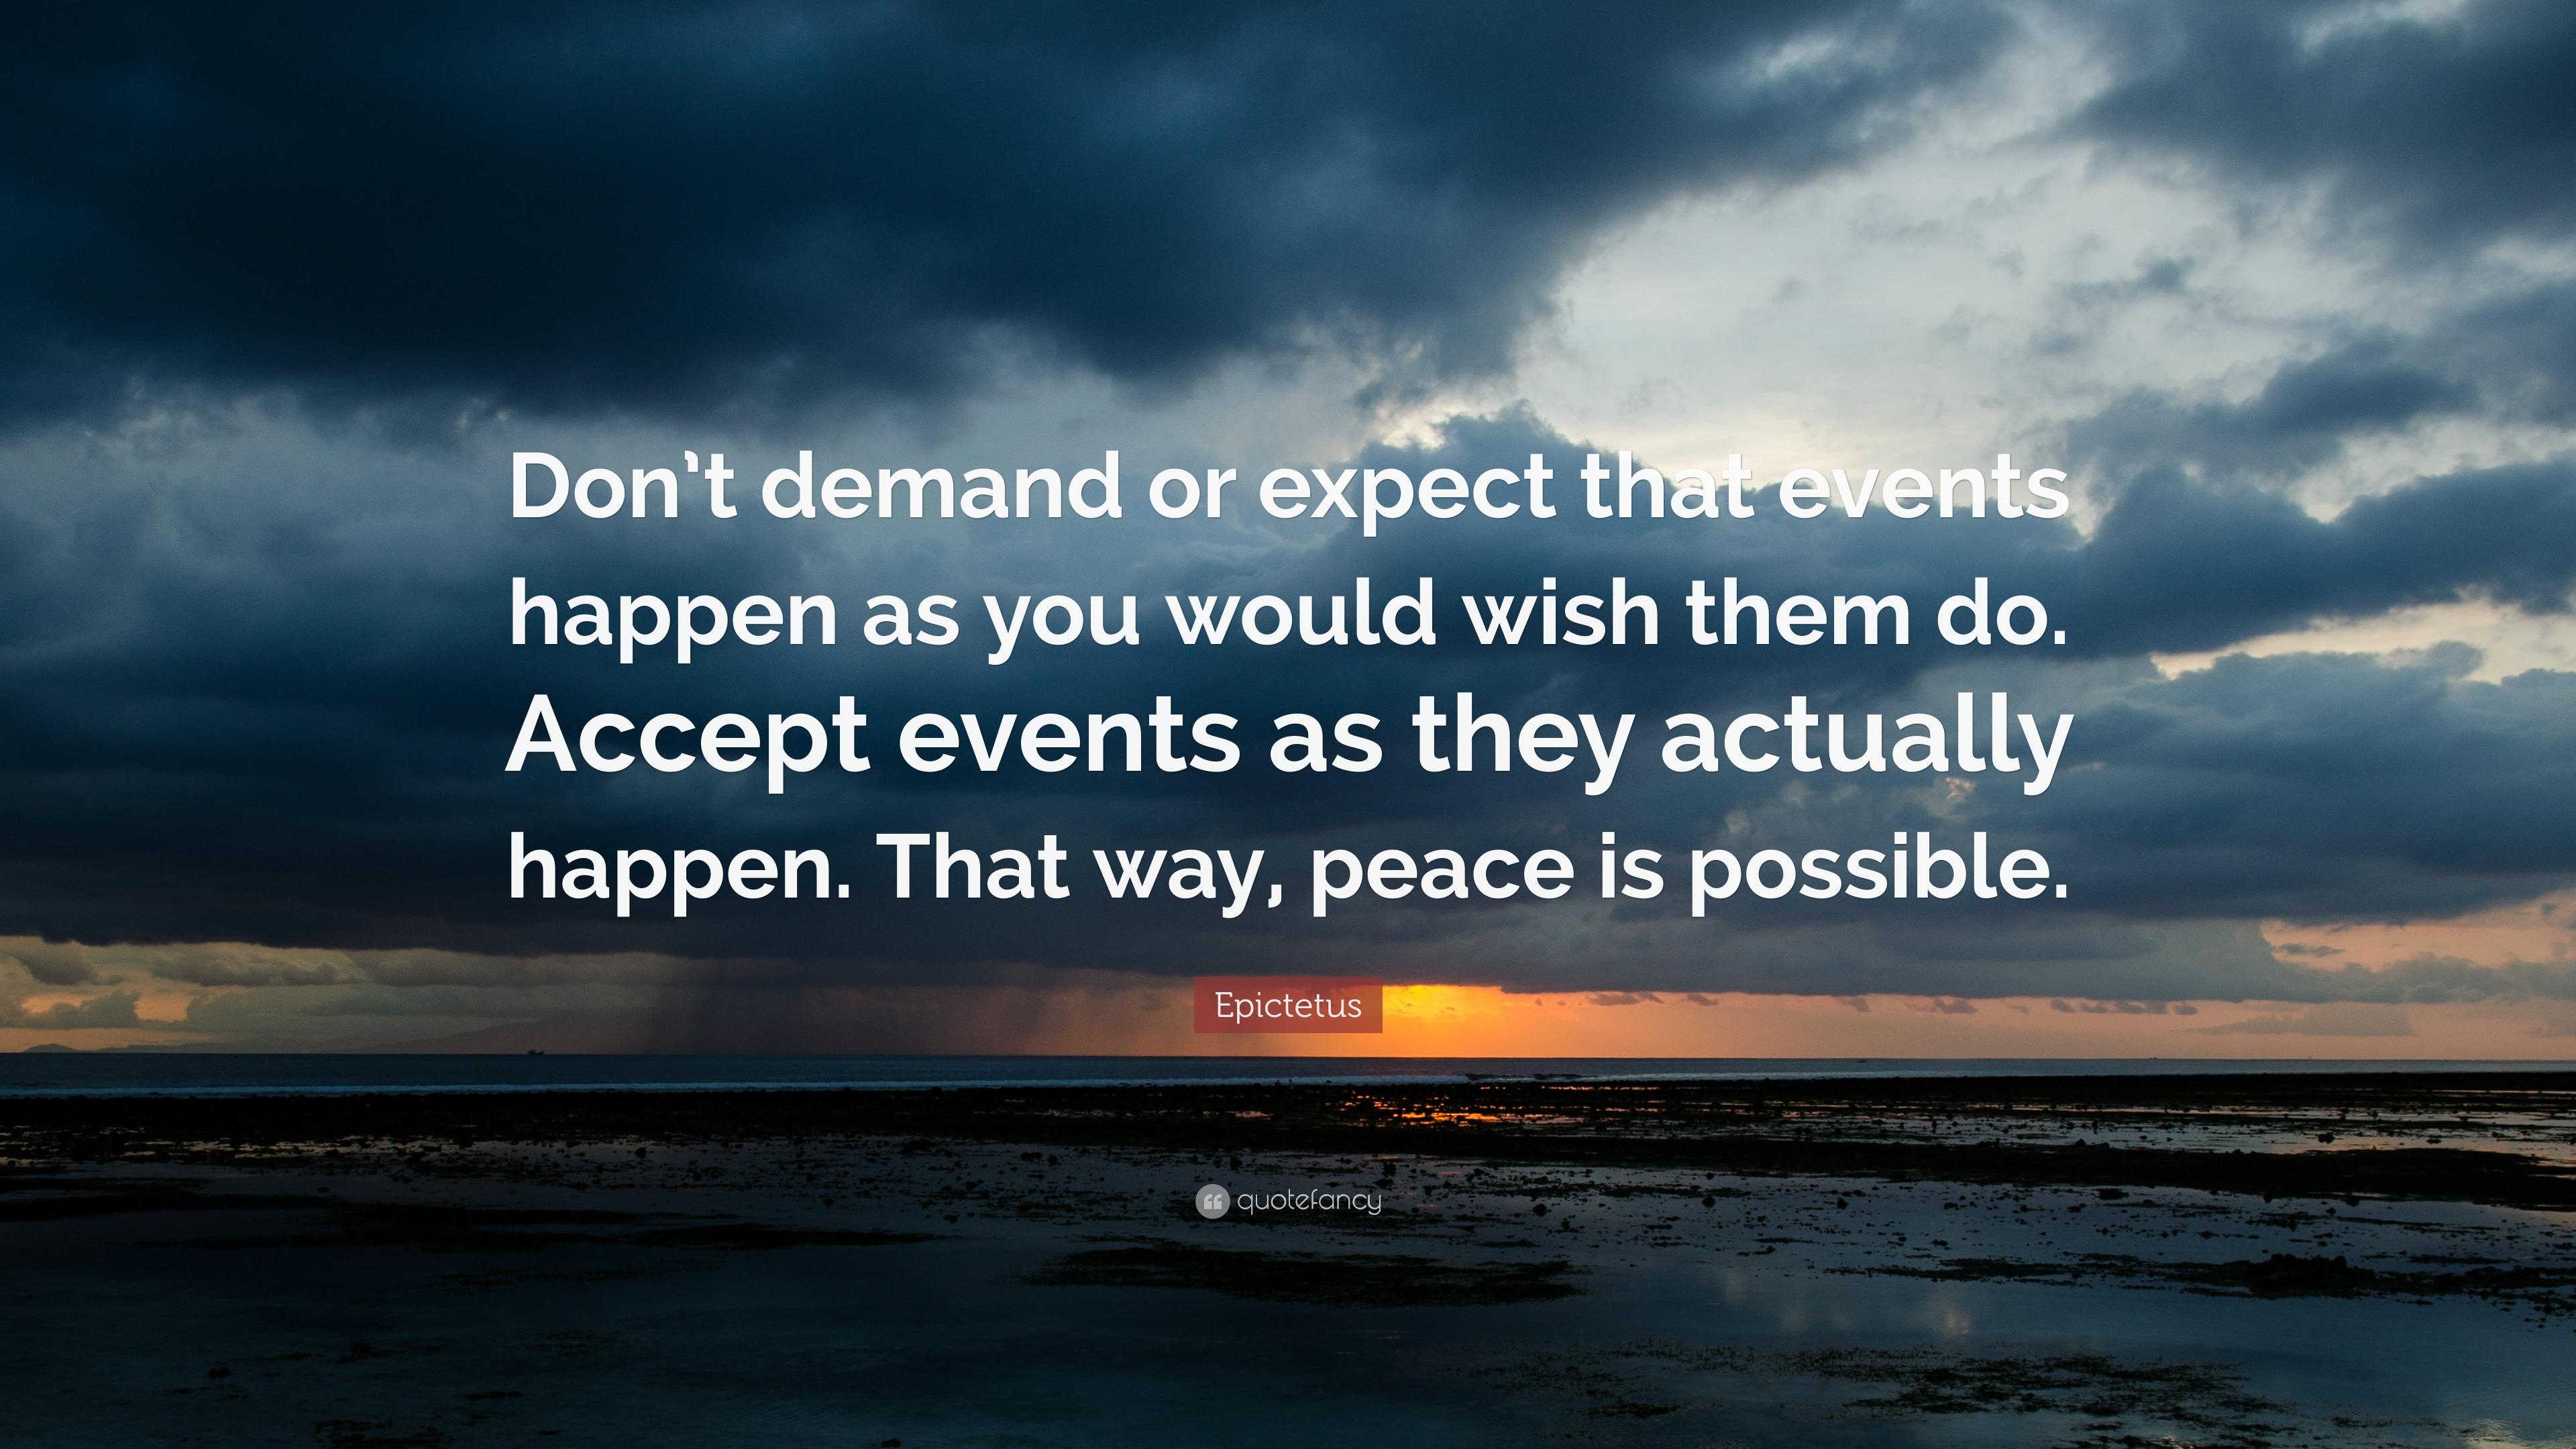 216590-Epictetus-Quote-Don-t-demand-or-expect-that-events-happen-as-you.jpg